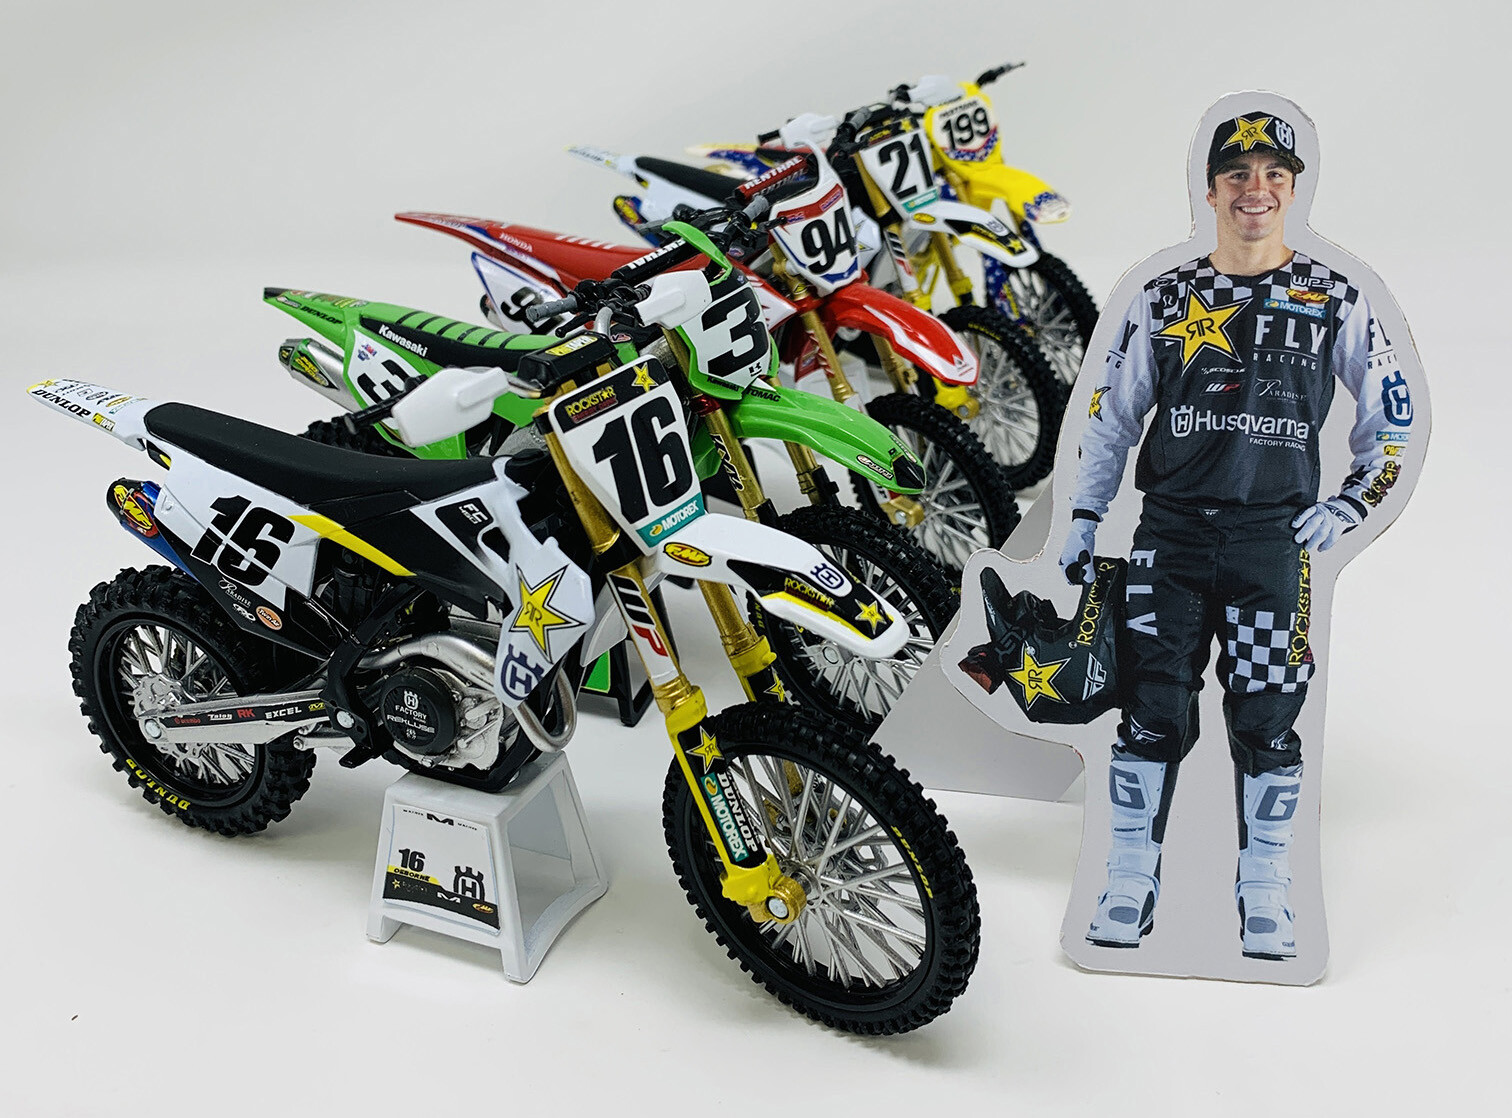 Factory Replica Bikes are Now Available from New Ray Toys - Racer X